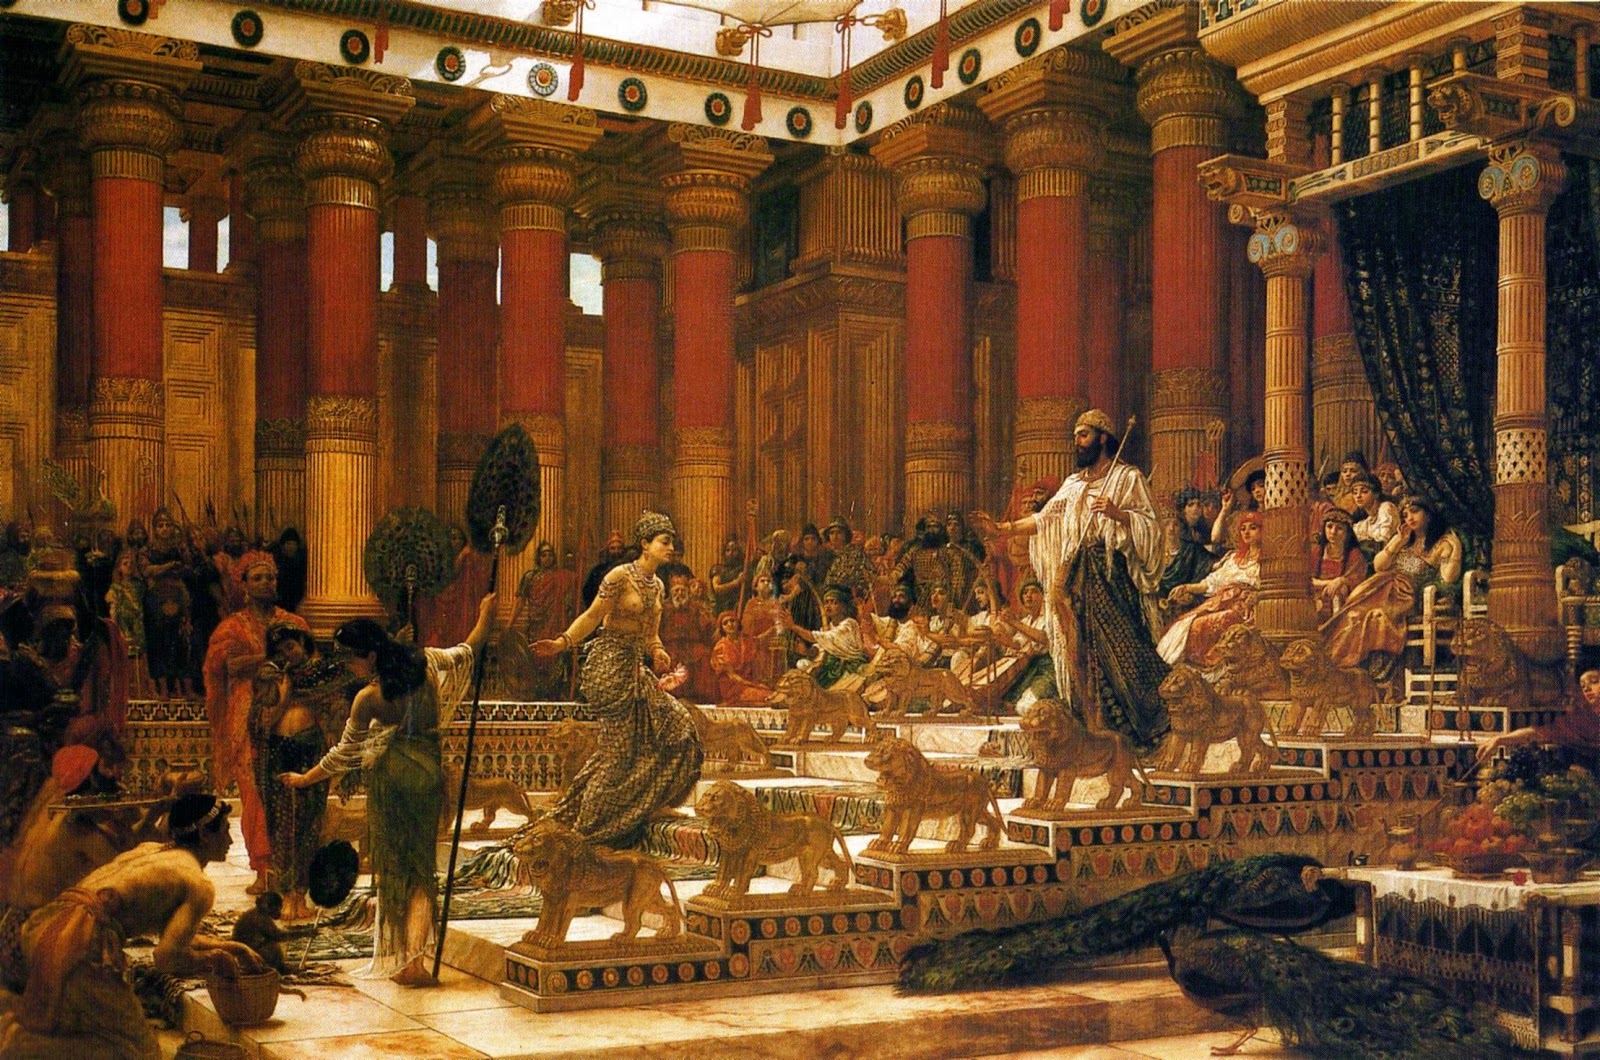 [%2527The_Visit_of_the_Queen_of_Sheba_to_King_Solomon%2527%252C_oil_on_canvas_painting_by_Edward_Poynter%252C_1890%252C_Art_Gallery_of_New_South_Wales%255B2%255D.jpg]